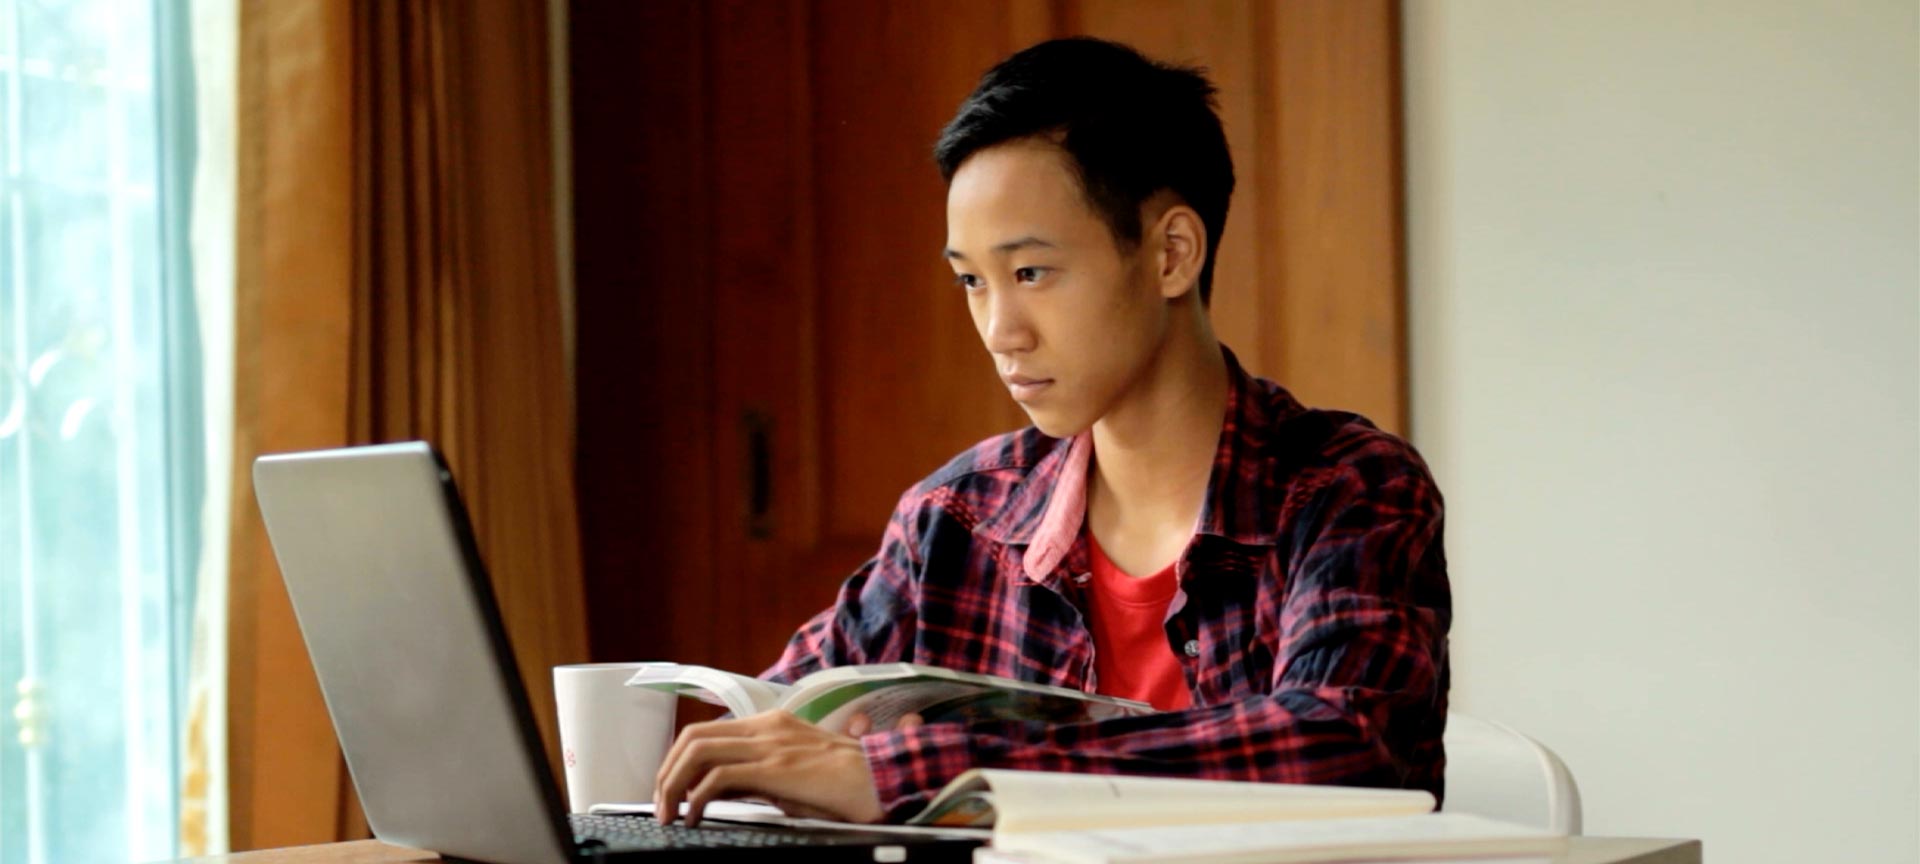 Male student using a laptop to study with book in hand